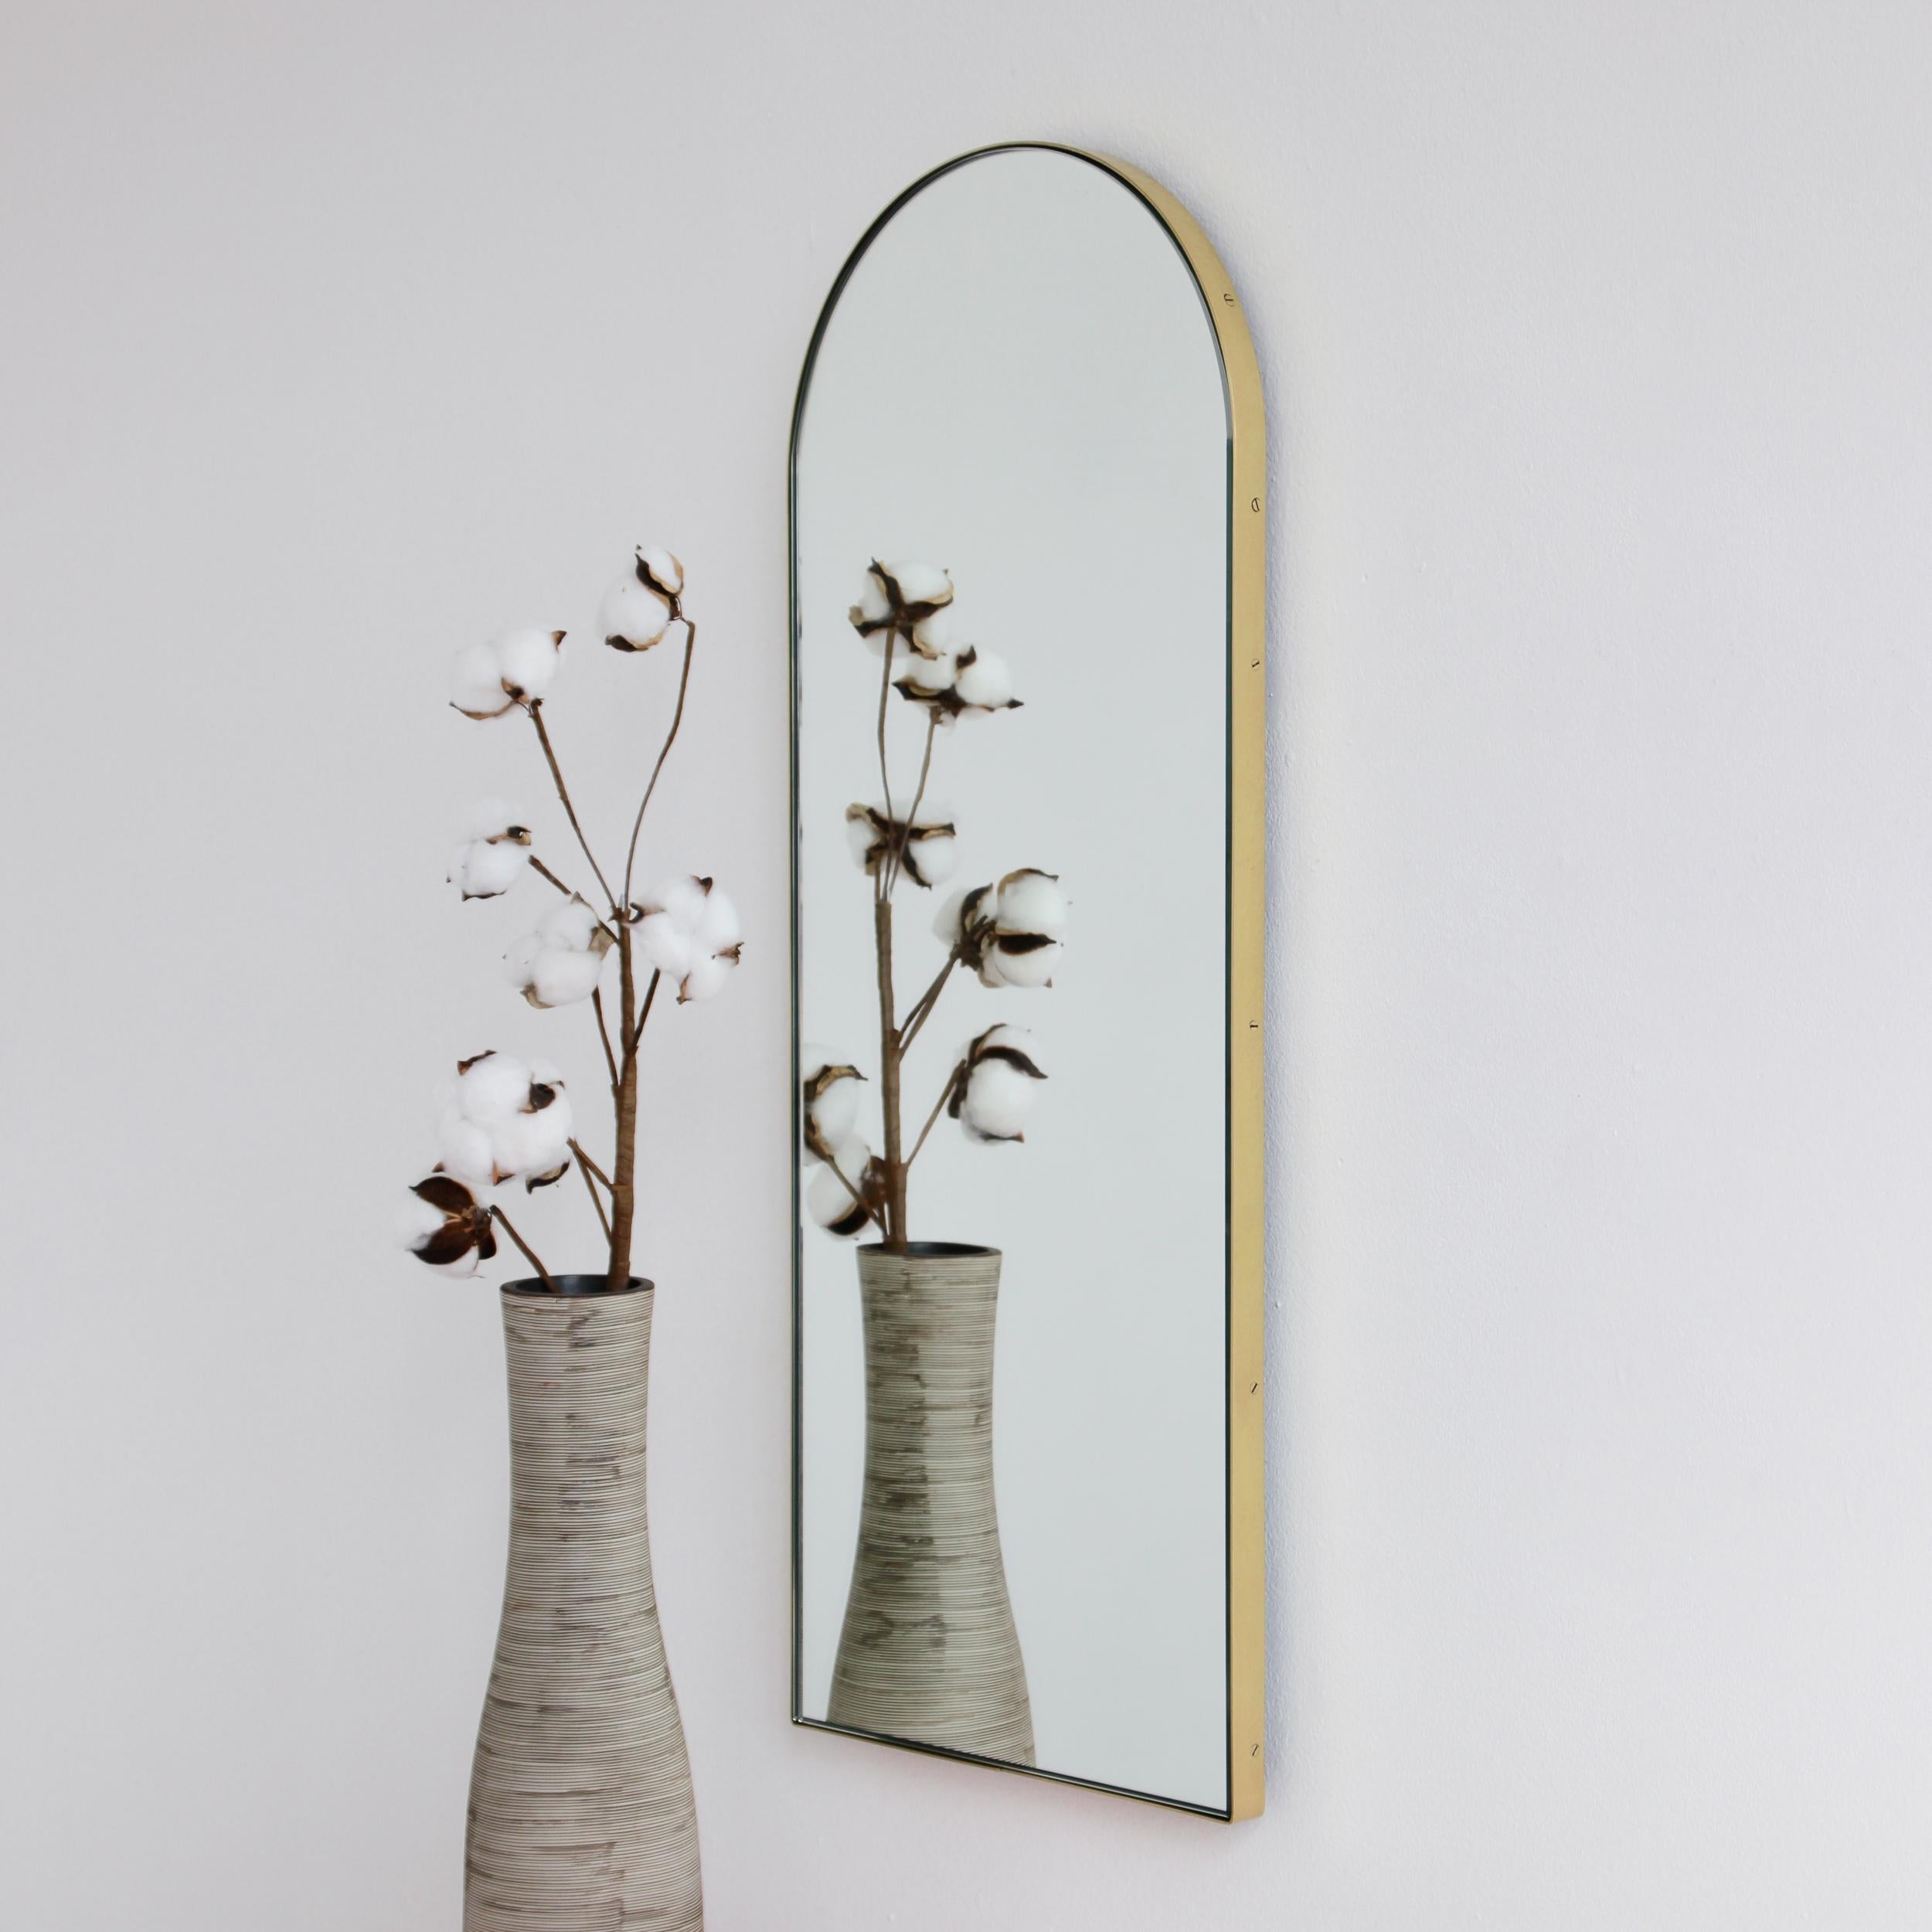 Contemporary Arcus™ arch shaped rose gold / peach mirror with an elegant solid brushed copper frame. Designed and made in London, UK.

Our mirrors are designed with an integrated French cleat (split batten) system that ensures the mirror is securely